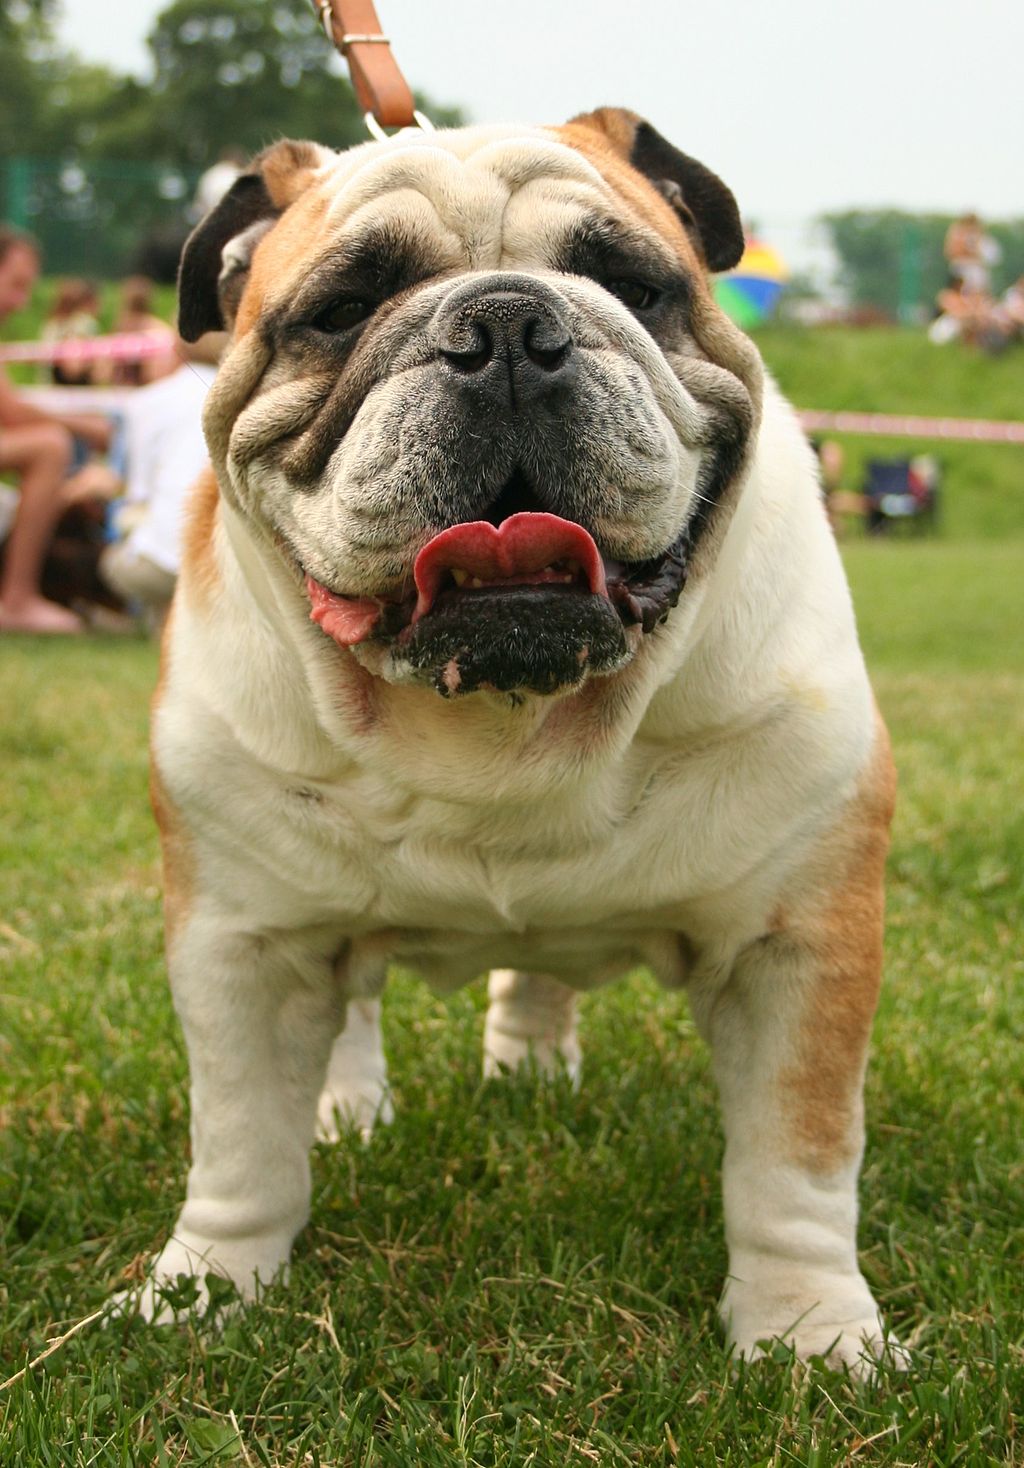 Casting directors for Legally Blonde The Musical are looking for a bulldog or 'bullish' dog to play Rufus in Birmingham